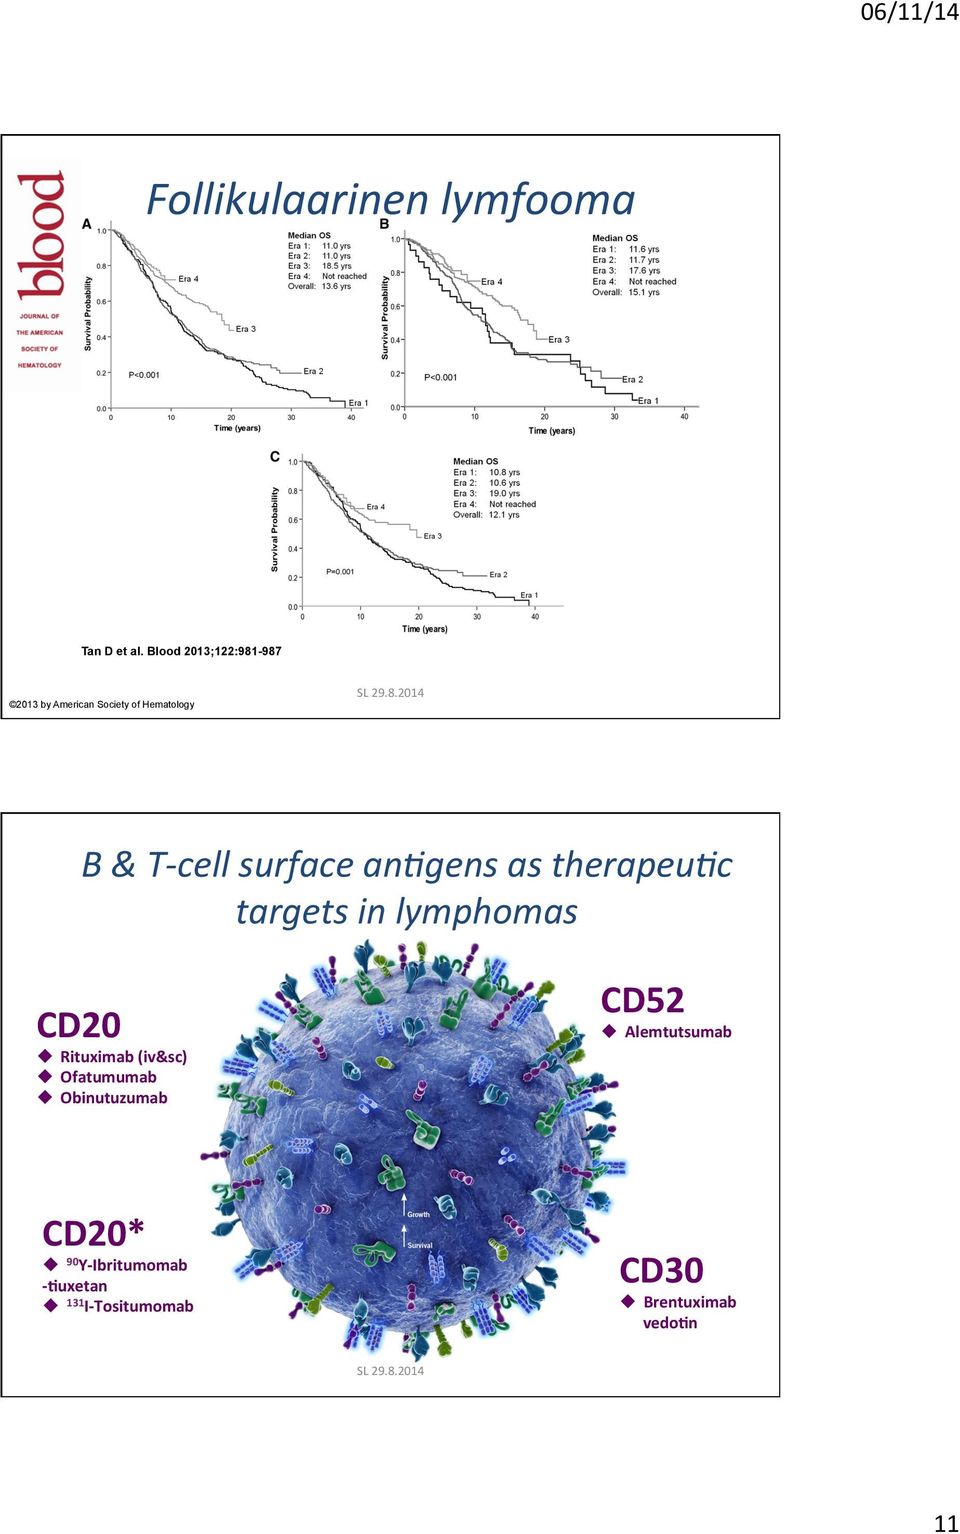 -987 2013 by American Society of Hematology SL 29.8.2014 B & T- cell surface anpgens as